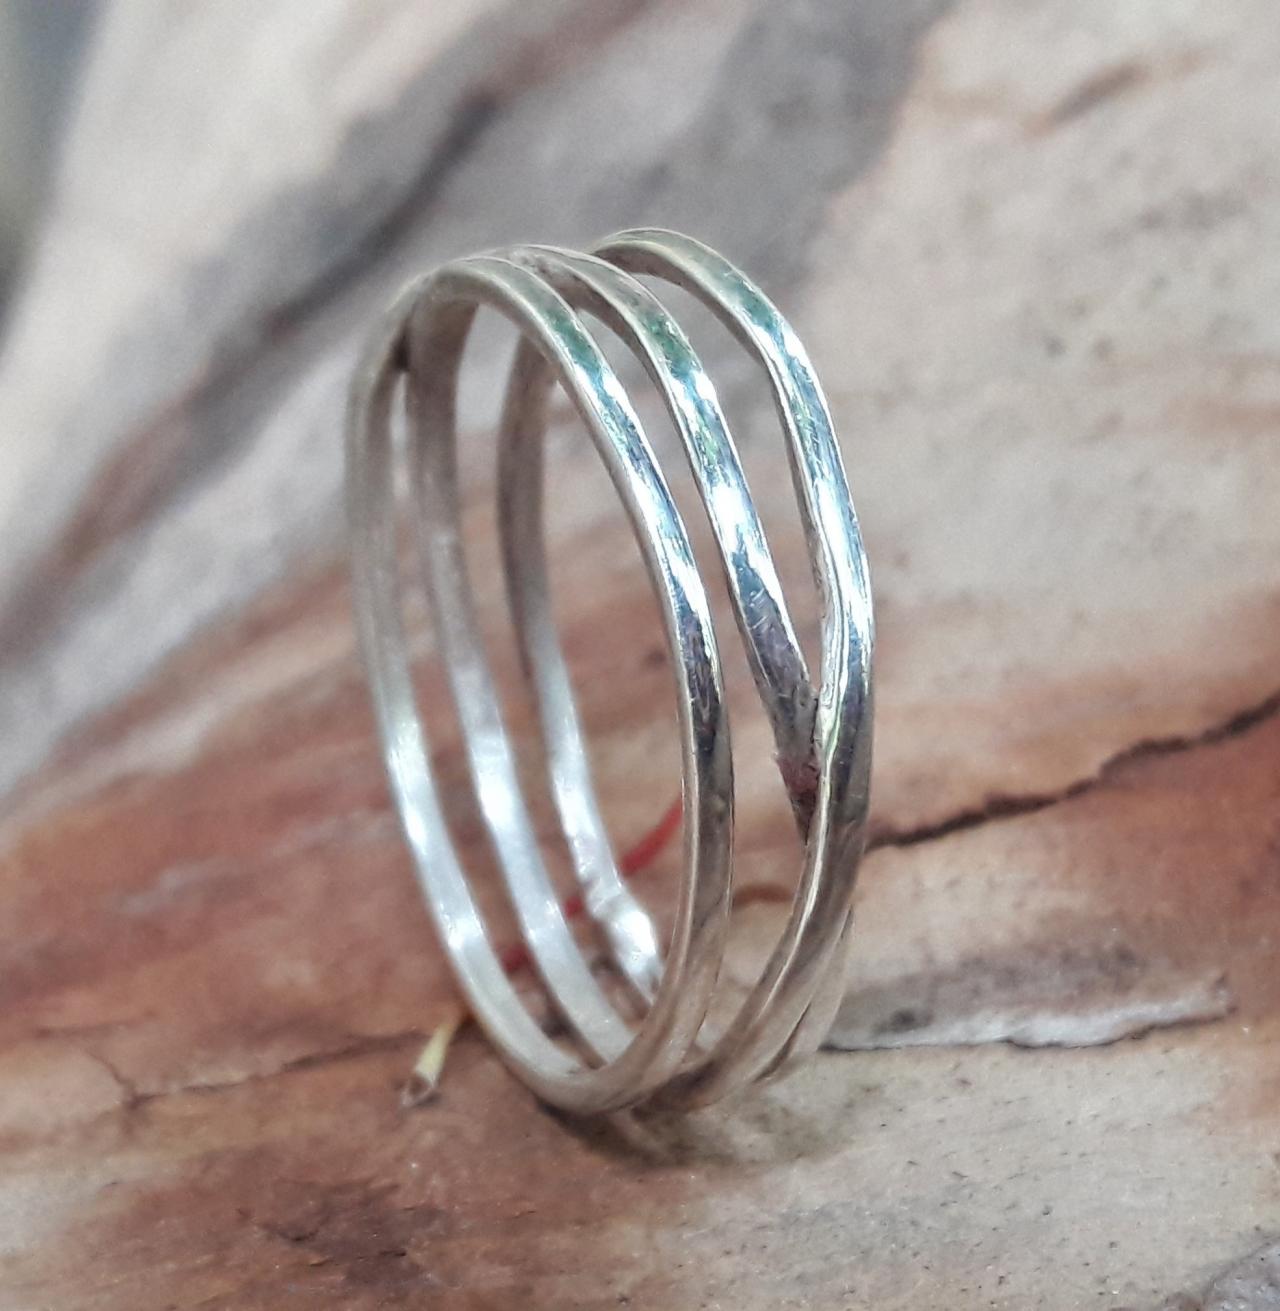 Minimalist Spiral Ring, 925 Sterling Silver Ring, Handmade Silver Ring, Thin Dainty Ring, Gift For Girlfriend